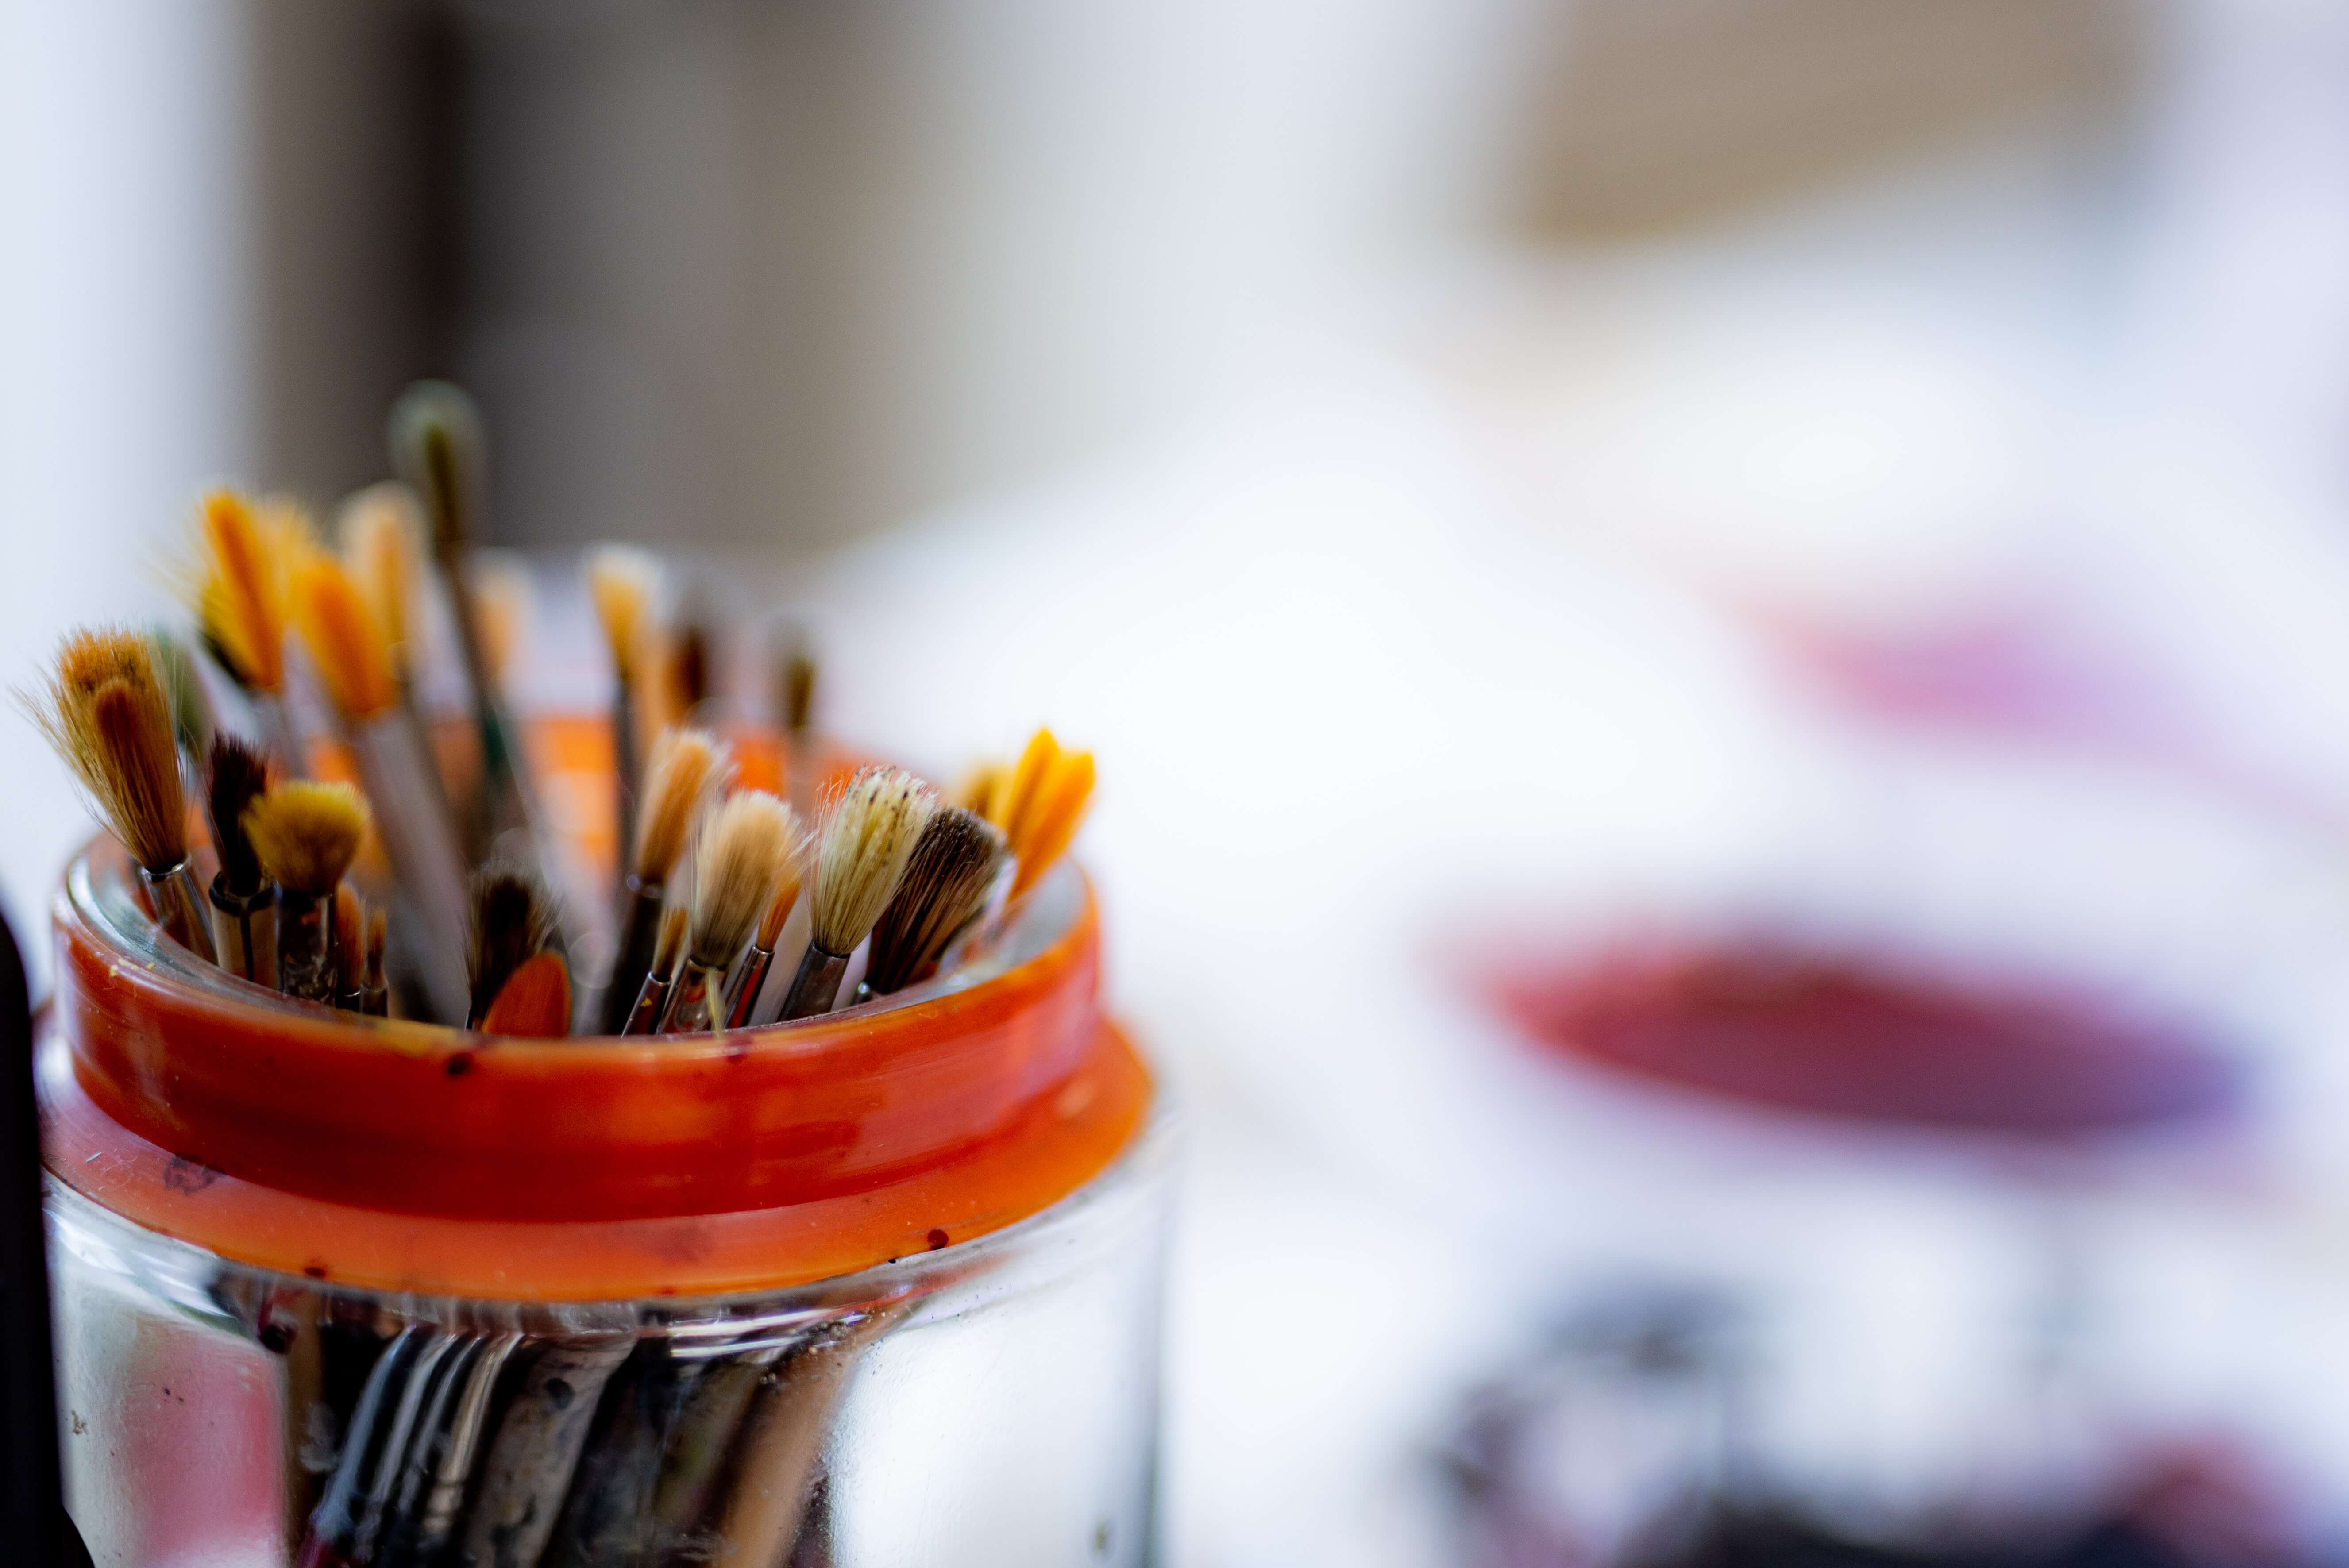 Shot of paint brushes standing in a jar with a red rim around the top and out of focus background.